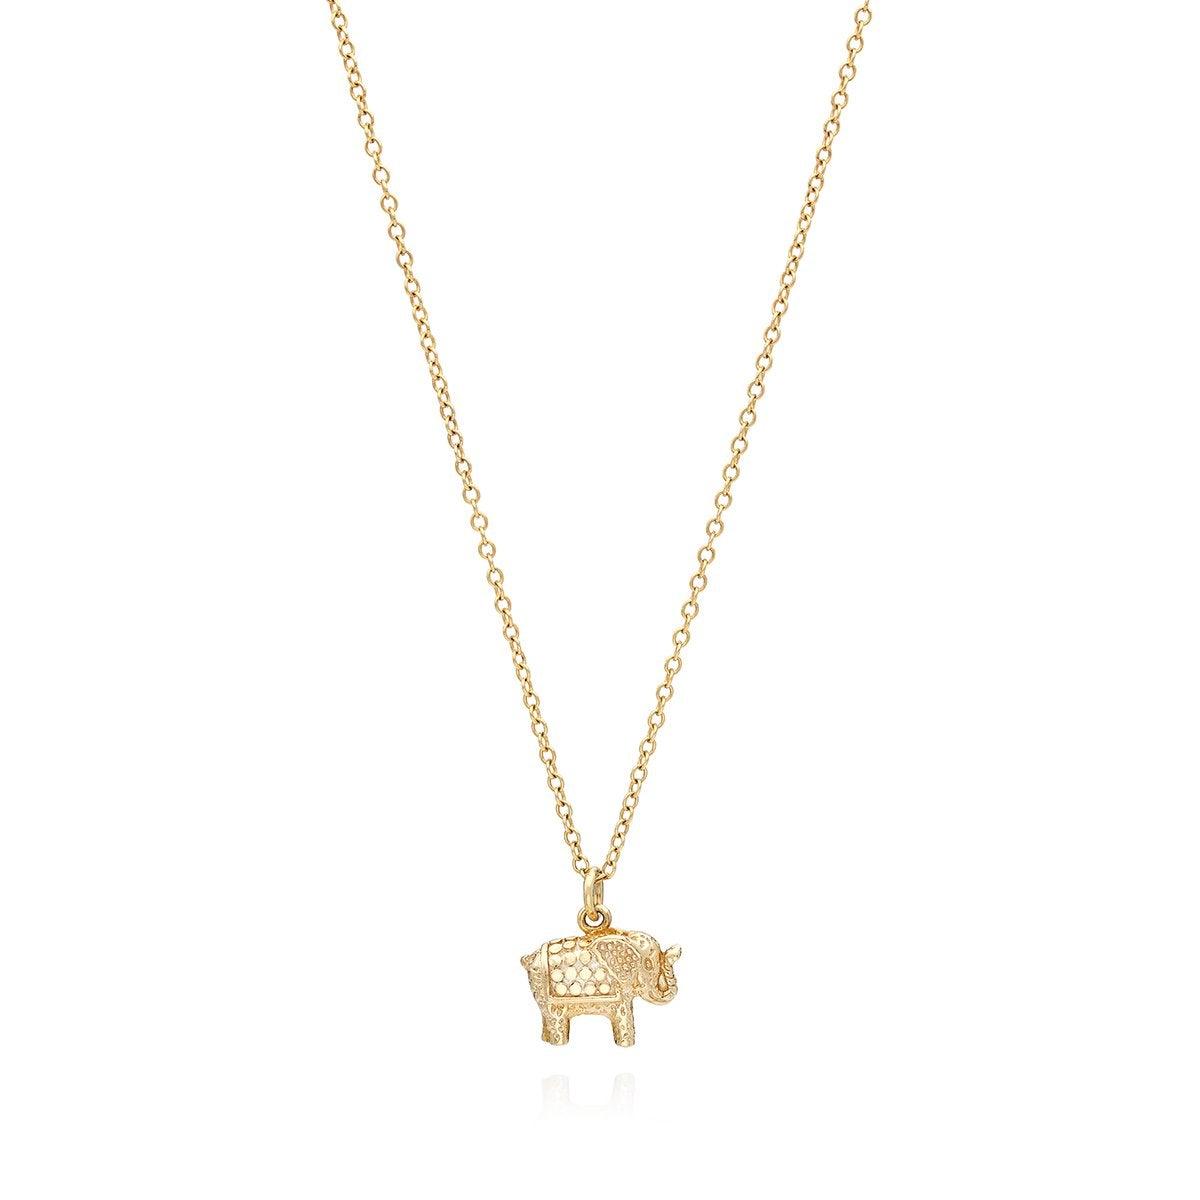 Anna Beck Small Elephant Charm Charity Necklace - Rococo Jewellery